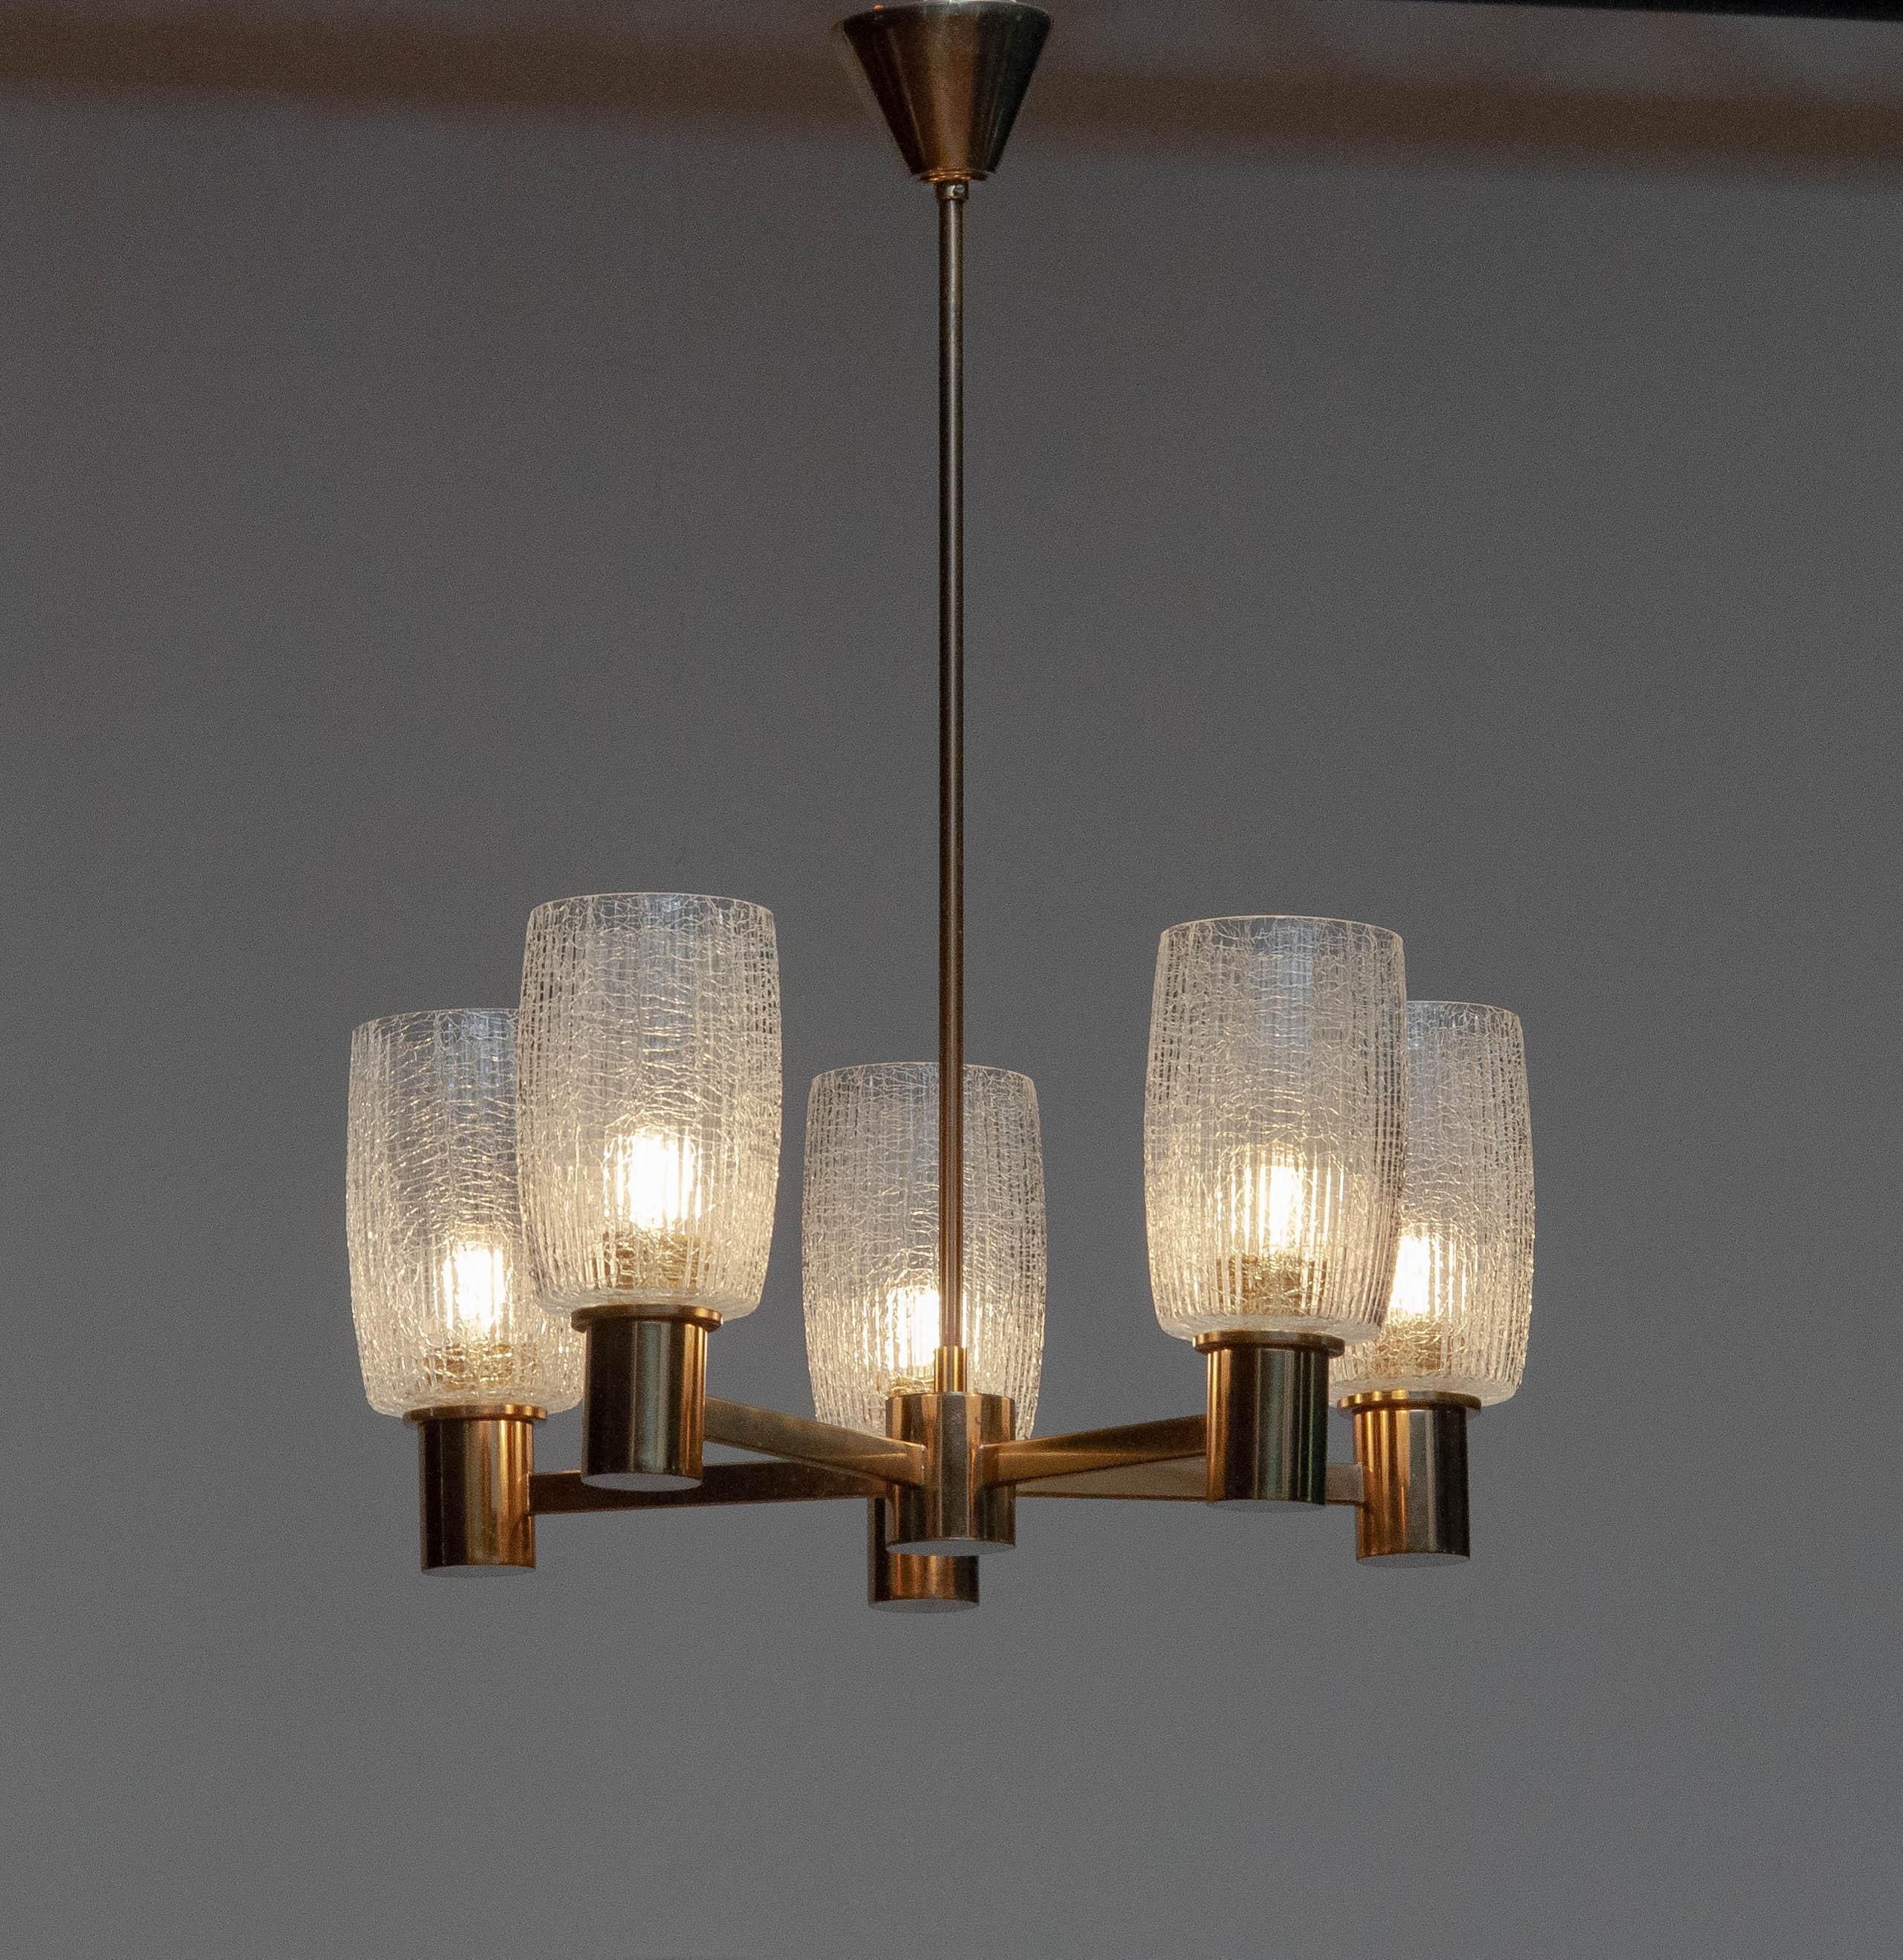 Beautiful brass chandelier manufactured in Germany by Doria in the 1960s.
The five large  ( 15 cm / 5.91 inches height and 10 cm / 3,94 inches in ø ) vases in clear crackled glass gives the chandelier a great sparkling effect and therefor 